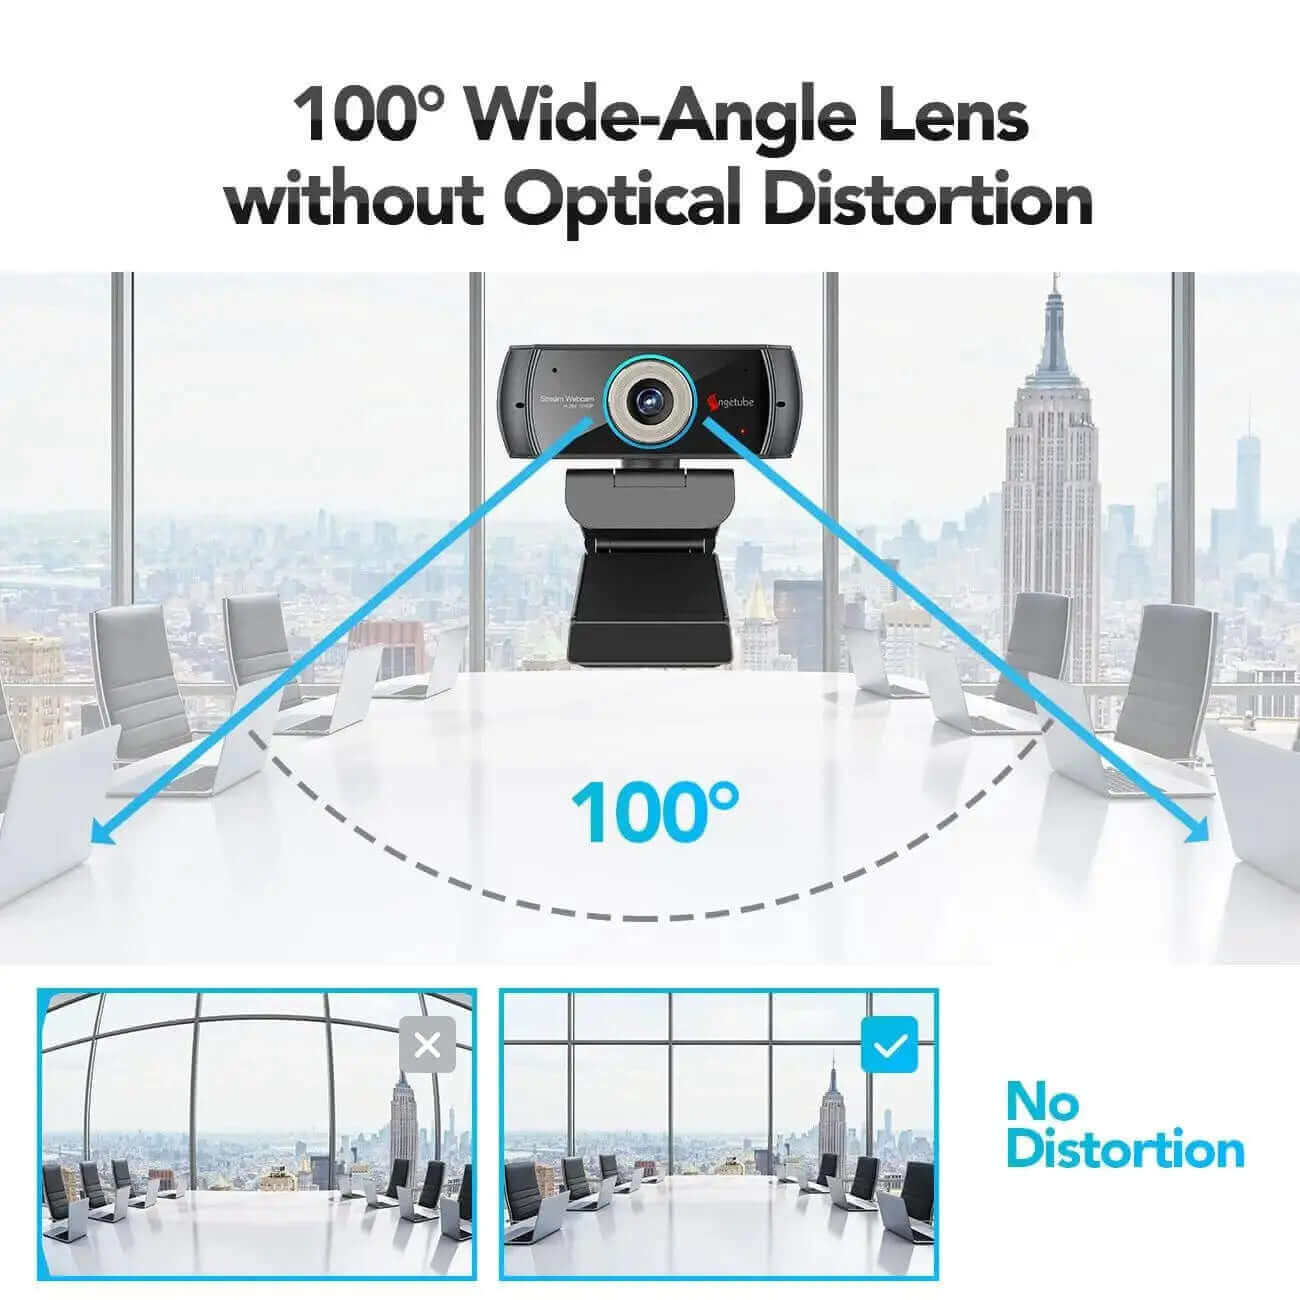 100°Wide-Angle Lenswithout Optica Distortion